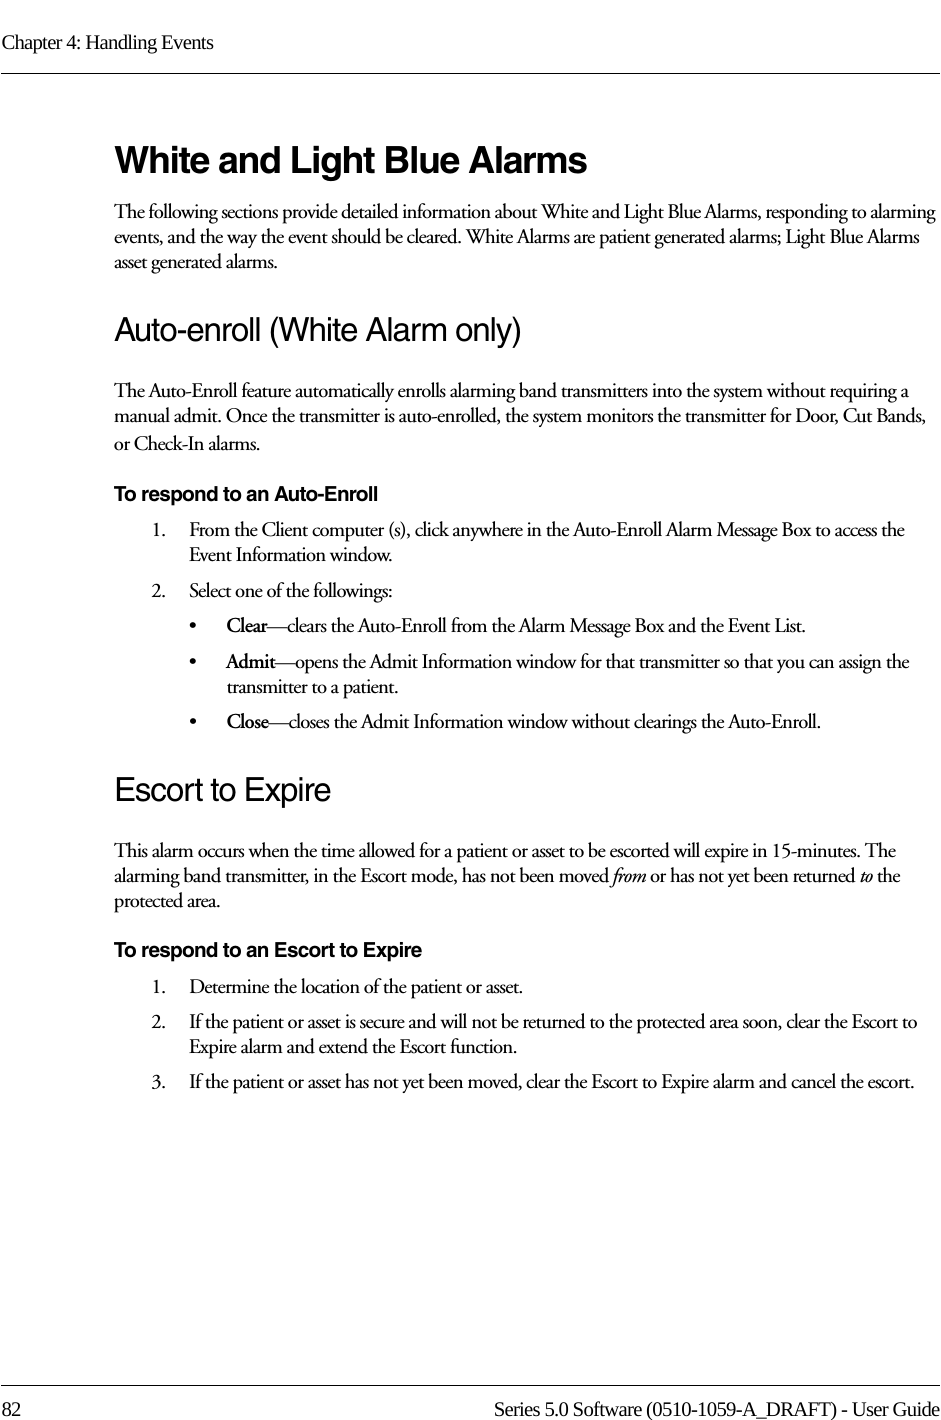 Chapter 4: Handling Events82 Series 5.0 Software (0510-1059-A_DRAFT) - User GuideWhite and Light Blue AlarmsThe following sections provide detailed information about White and Light Blue Alarms, responding to alarming events, and the way the event should be cleared. White Alarms are patient generated alarms; Light Blue Alarms asset generated alarms.Auto-enroll (White Alarm only)The Auto-Enroll feature automatically enrolls alarming band transmitters into the system without requiring a manual admit. Once the transmitter is auto-enrolled, the system monitors the transmitter for Door, Cut Bands, or Check-In alarms.To respond to an Auto-Enroll1.    From the Client computer (s), click anywhere in the Auto-Enroll Alarm Message Box to access the Event Information window.2.    Select one of the followings: •Clear—clears the Auto-Enroll from the Alarm Message Box and the Event List.•Admit—opens the Admit Information window for that transmitter so that you can assign the transmitter to a patient. •Close—closes the Admit Information window without clearings the Auto-Enroll.Escort to ExpireThis alarm occurs when the time allowed for a patient or asset to be escorted will expire in 15-minutes. The alarming band transmitter, in the Escort mode, has not been moved from or has not yet been returned to the protected area.To respond to an Escort to Expire1.    Determine the location of the patient or asset.2.    If the patient or asset is secure and will not be returned to the protected area soon, clear the Escort to Expire alarm and extend the Escort function. 3.    If the patient or asset has not yet been moved, clear the Escort to Expire alarm and cancel the escort. 